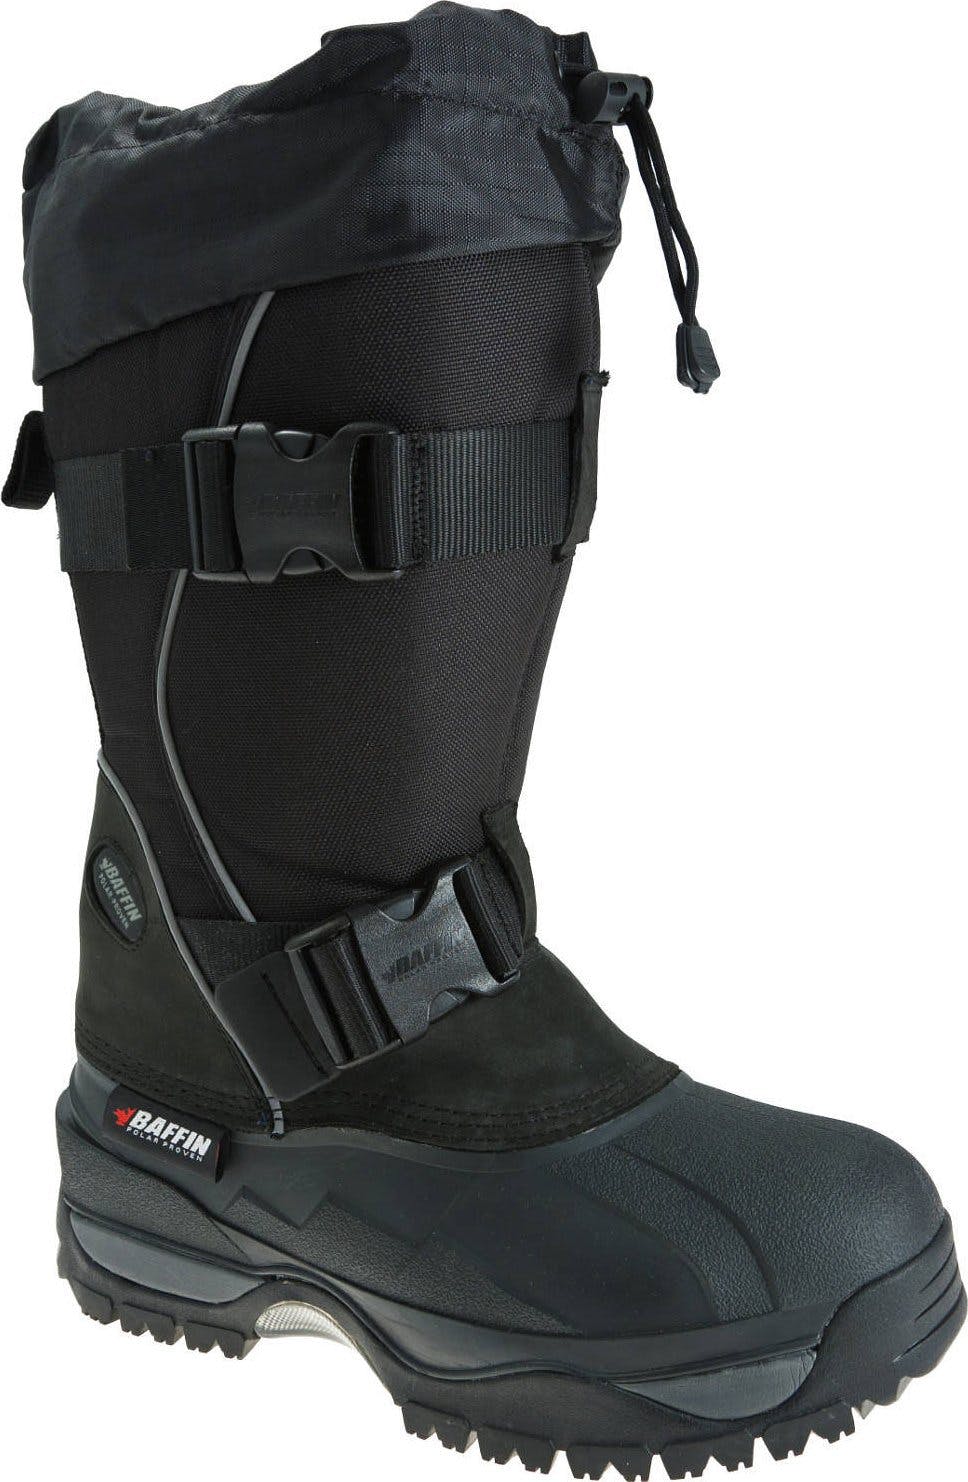 Product image for Impact Boots - Men's